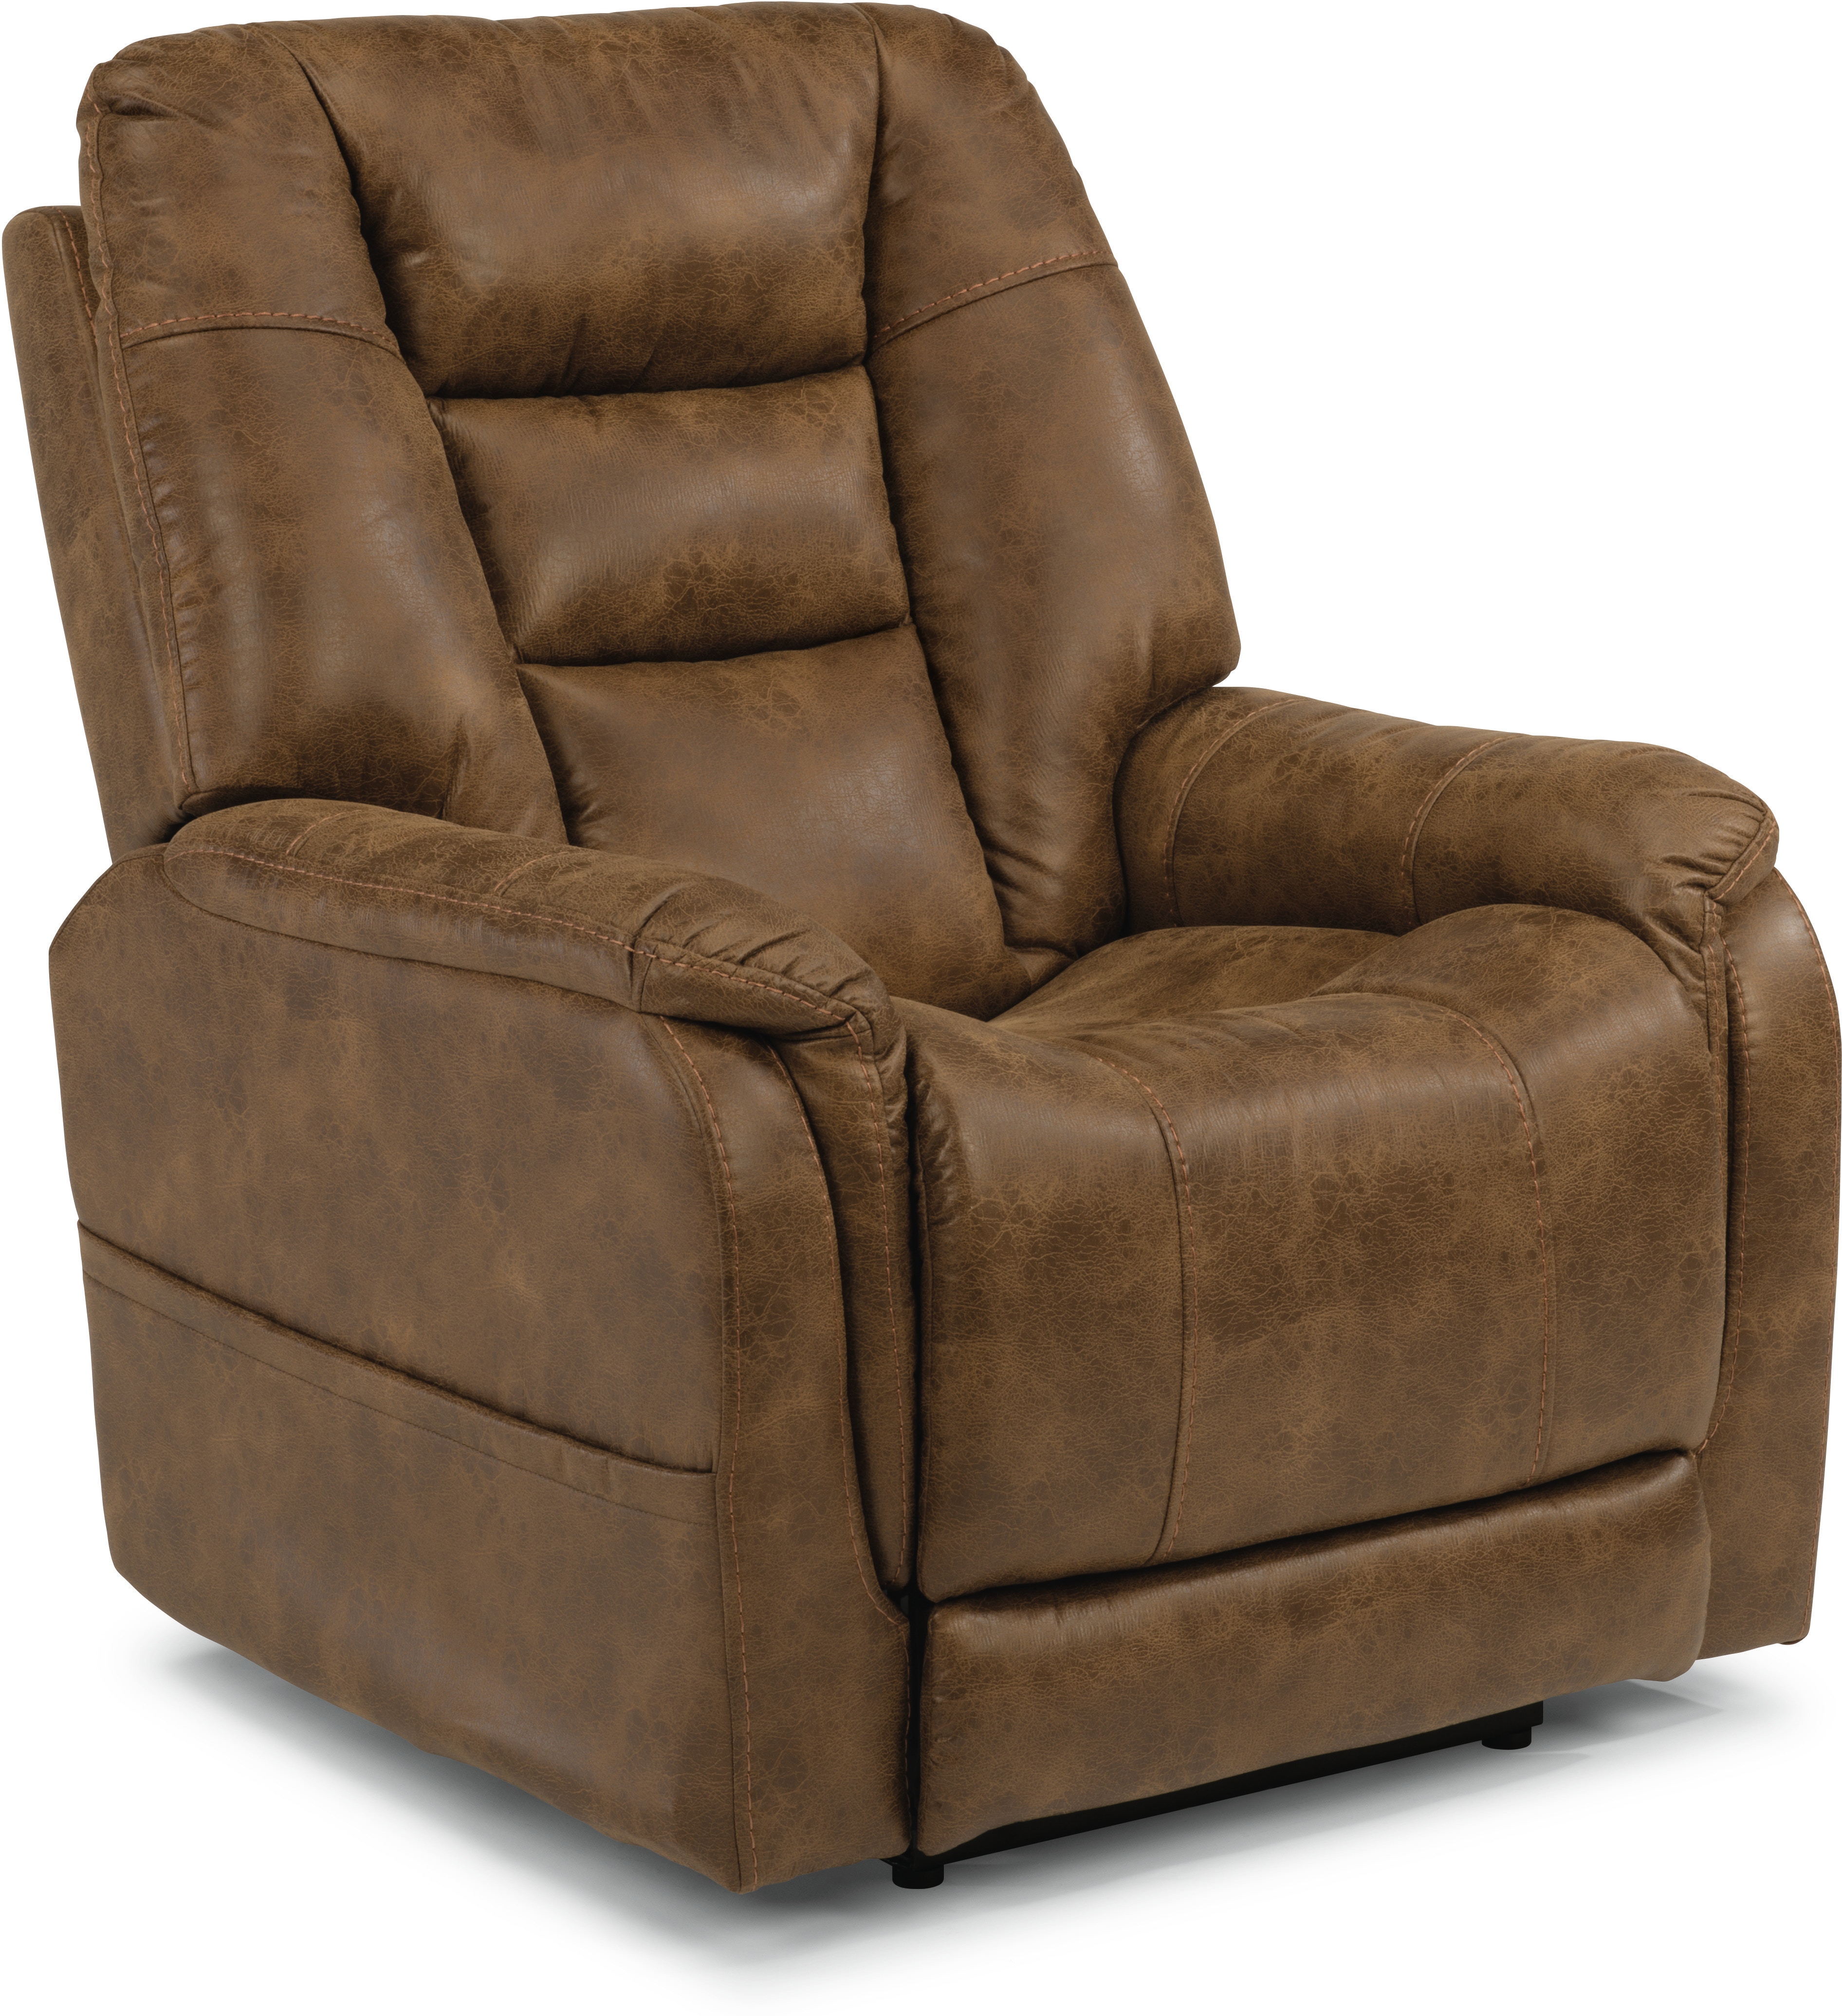 Flexsteel Latitudes-Zoey Power Gliding Recliner with Power Headrest and USB  Ports, Williams & Kay